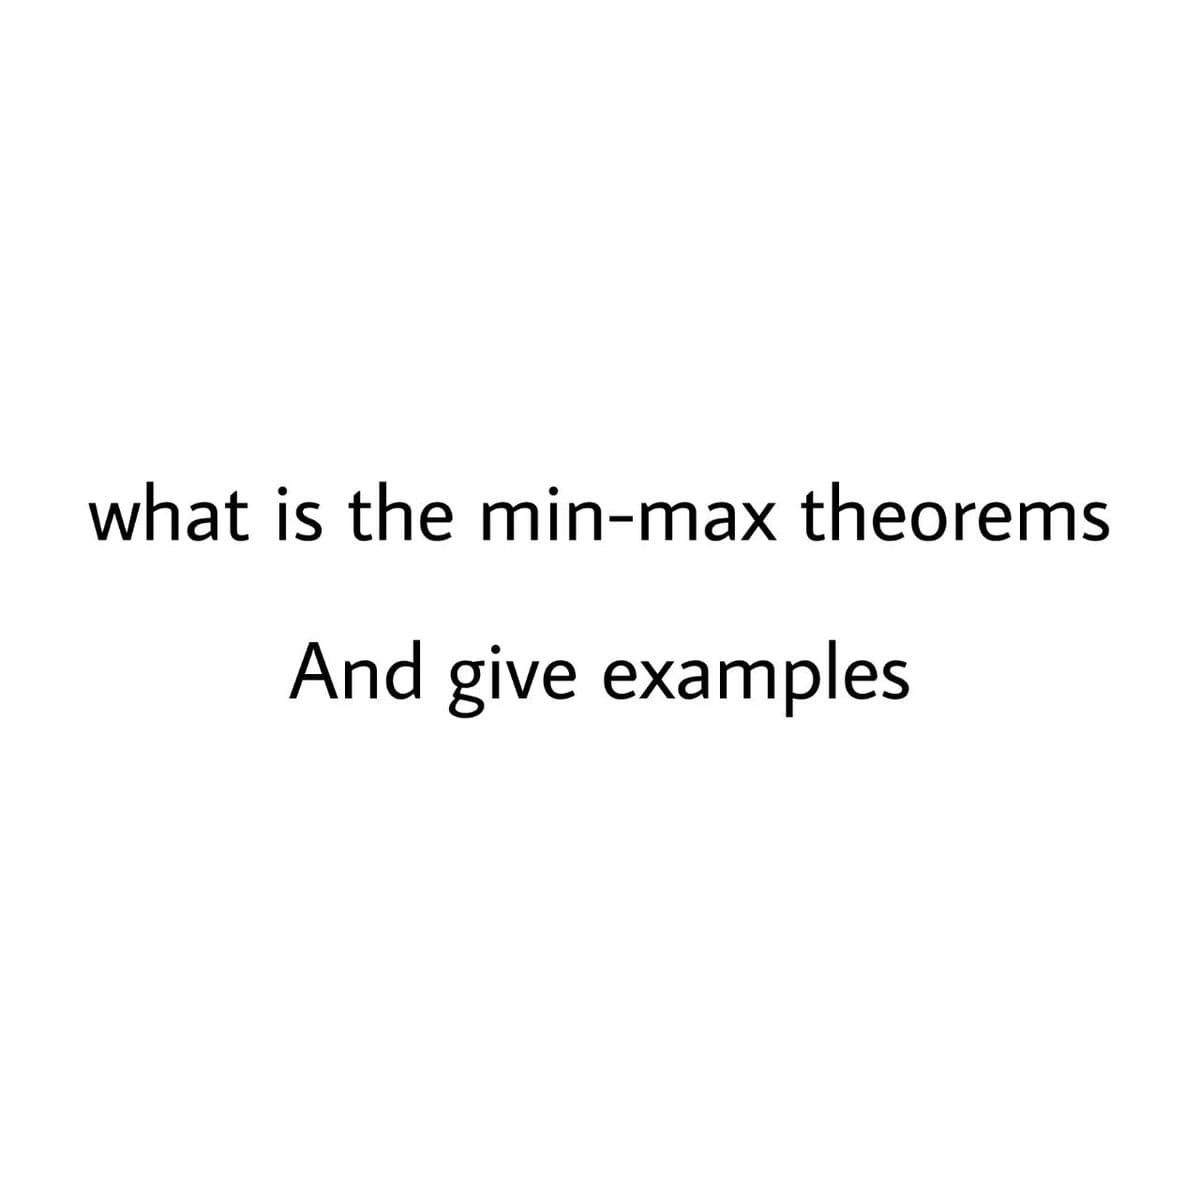 what is the min-max theorems
And give examples
